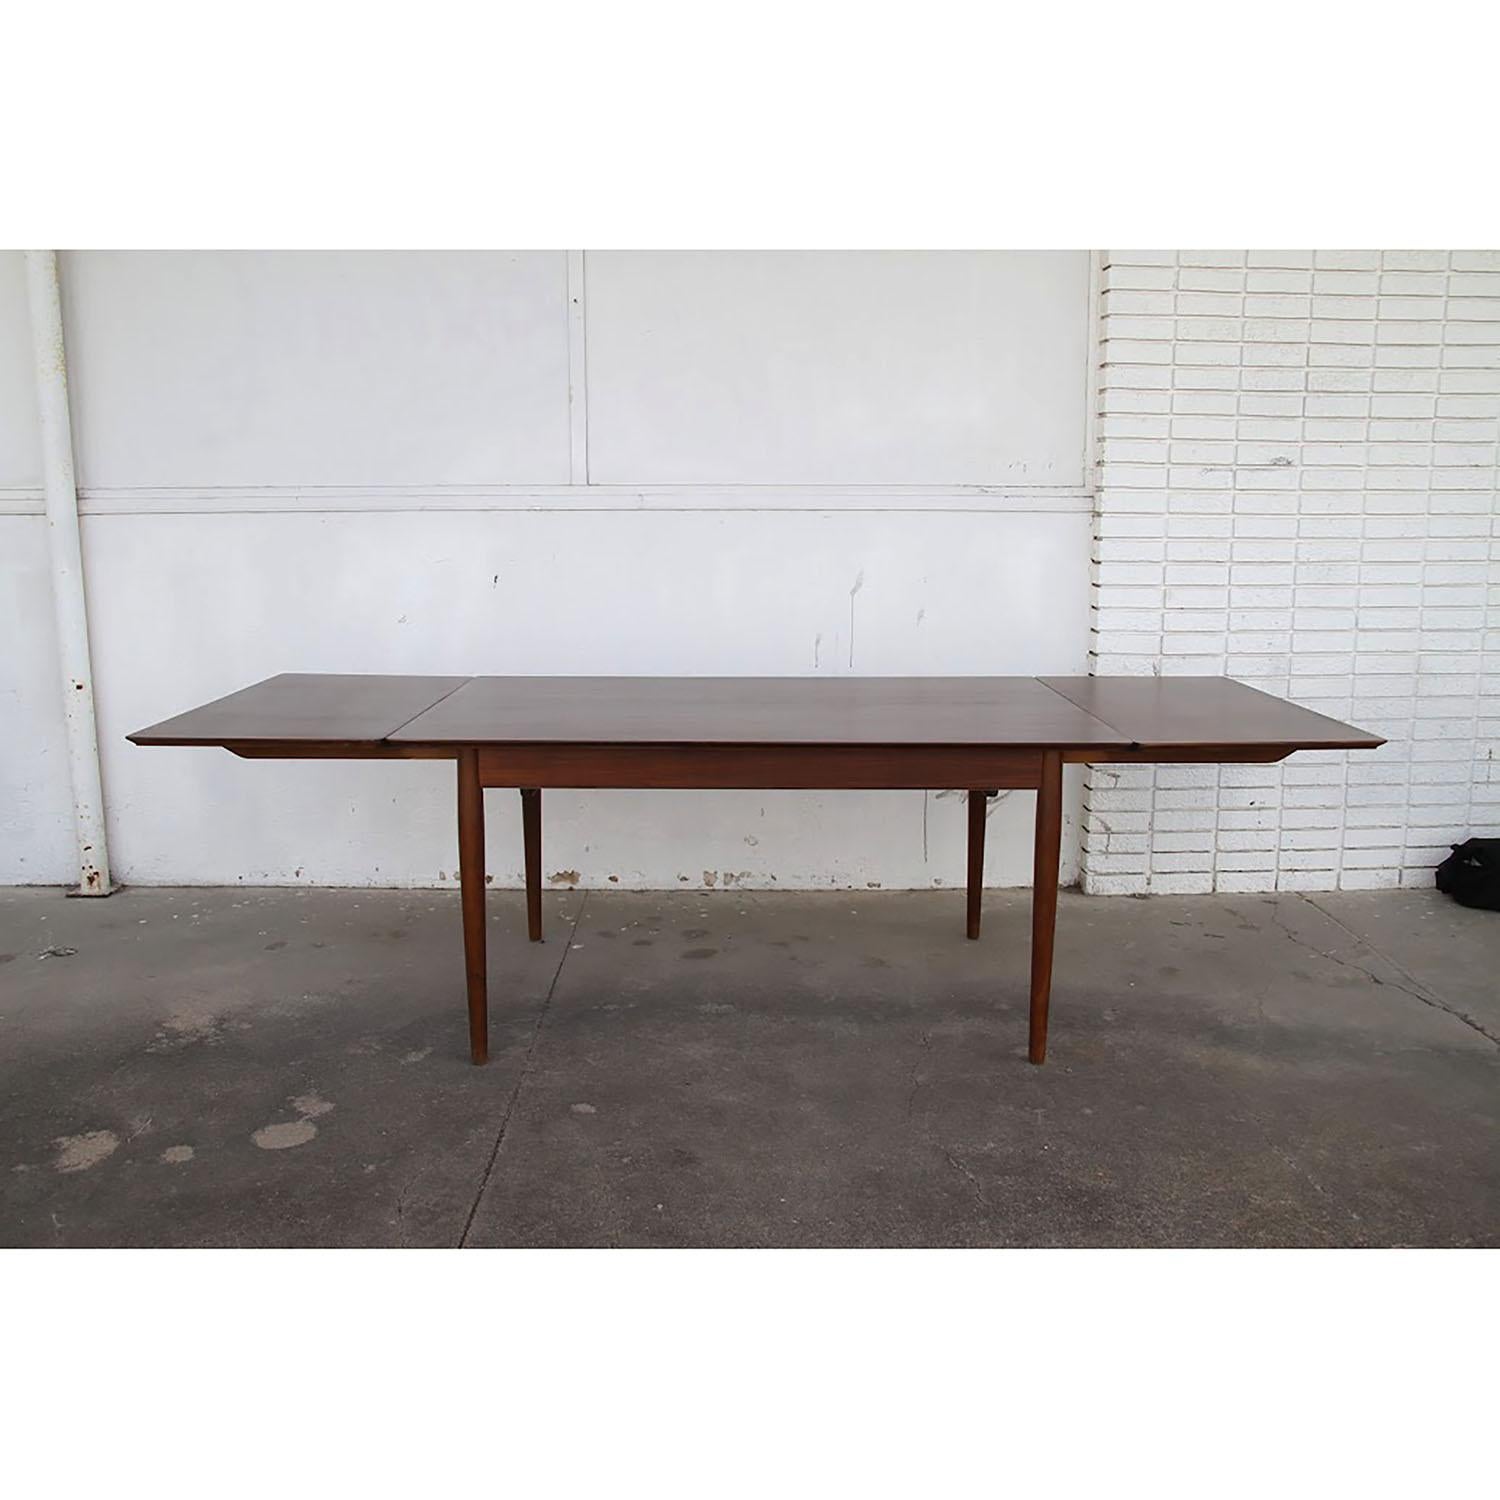 Arne Vodder for George Tanier Siebart Mobler extendable dining table.

Early production teak Arne Vodder dining table, manufactured by SIbast, Denmark and distributed by George Tanier. Two extension leaves.

 
There is some lifting due to age. See